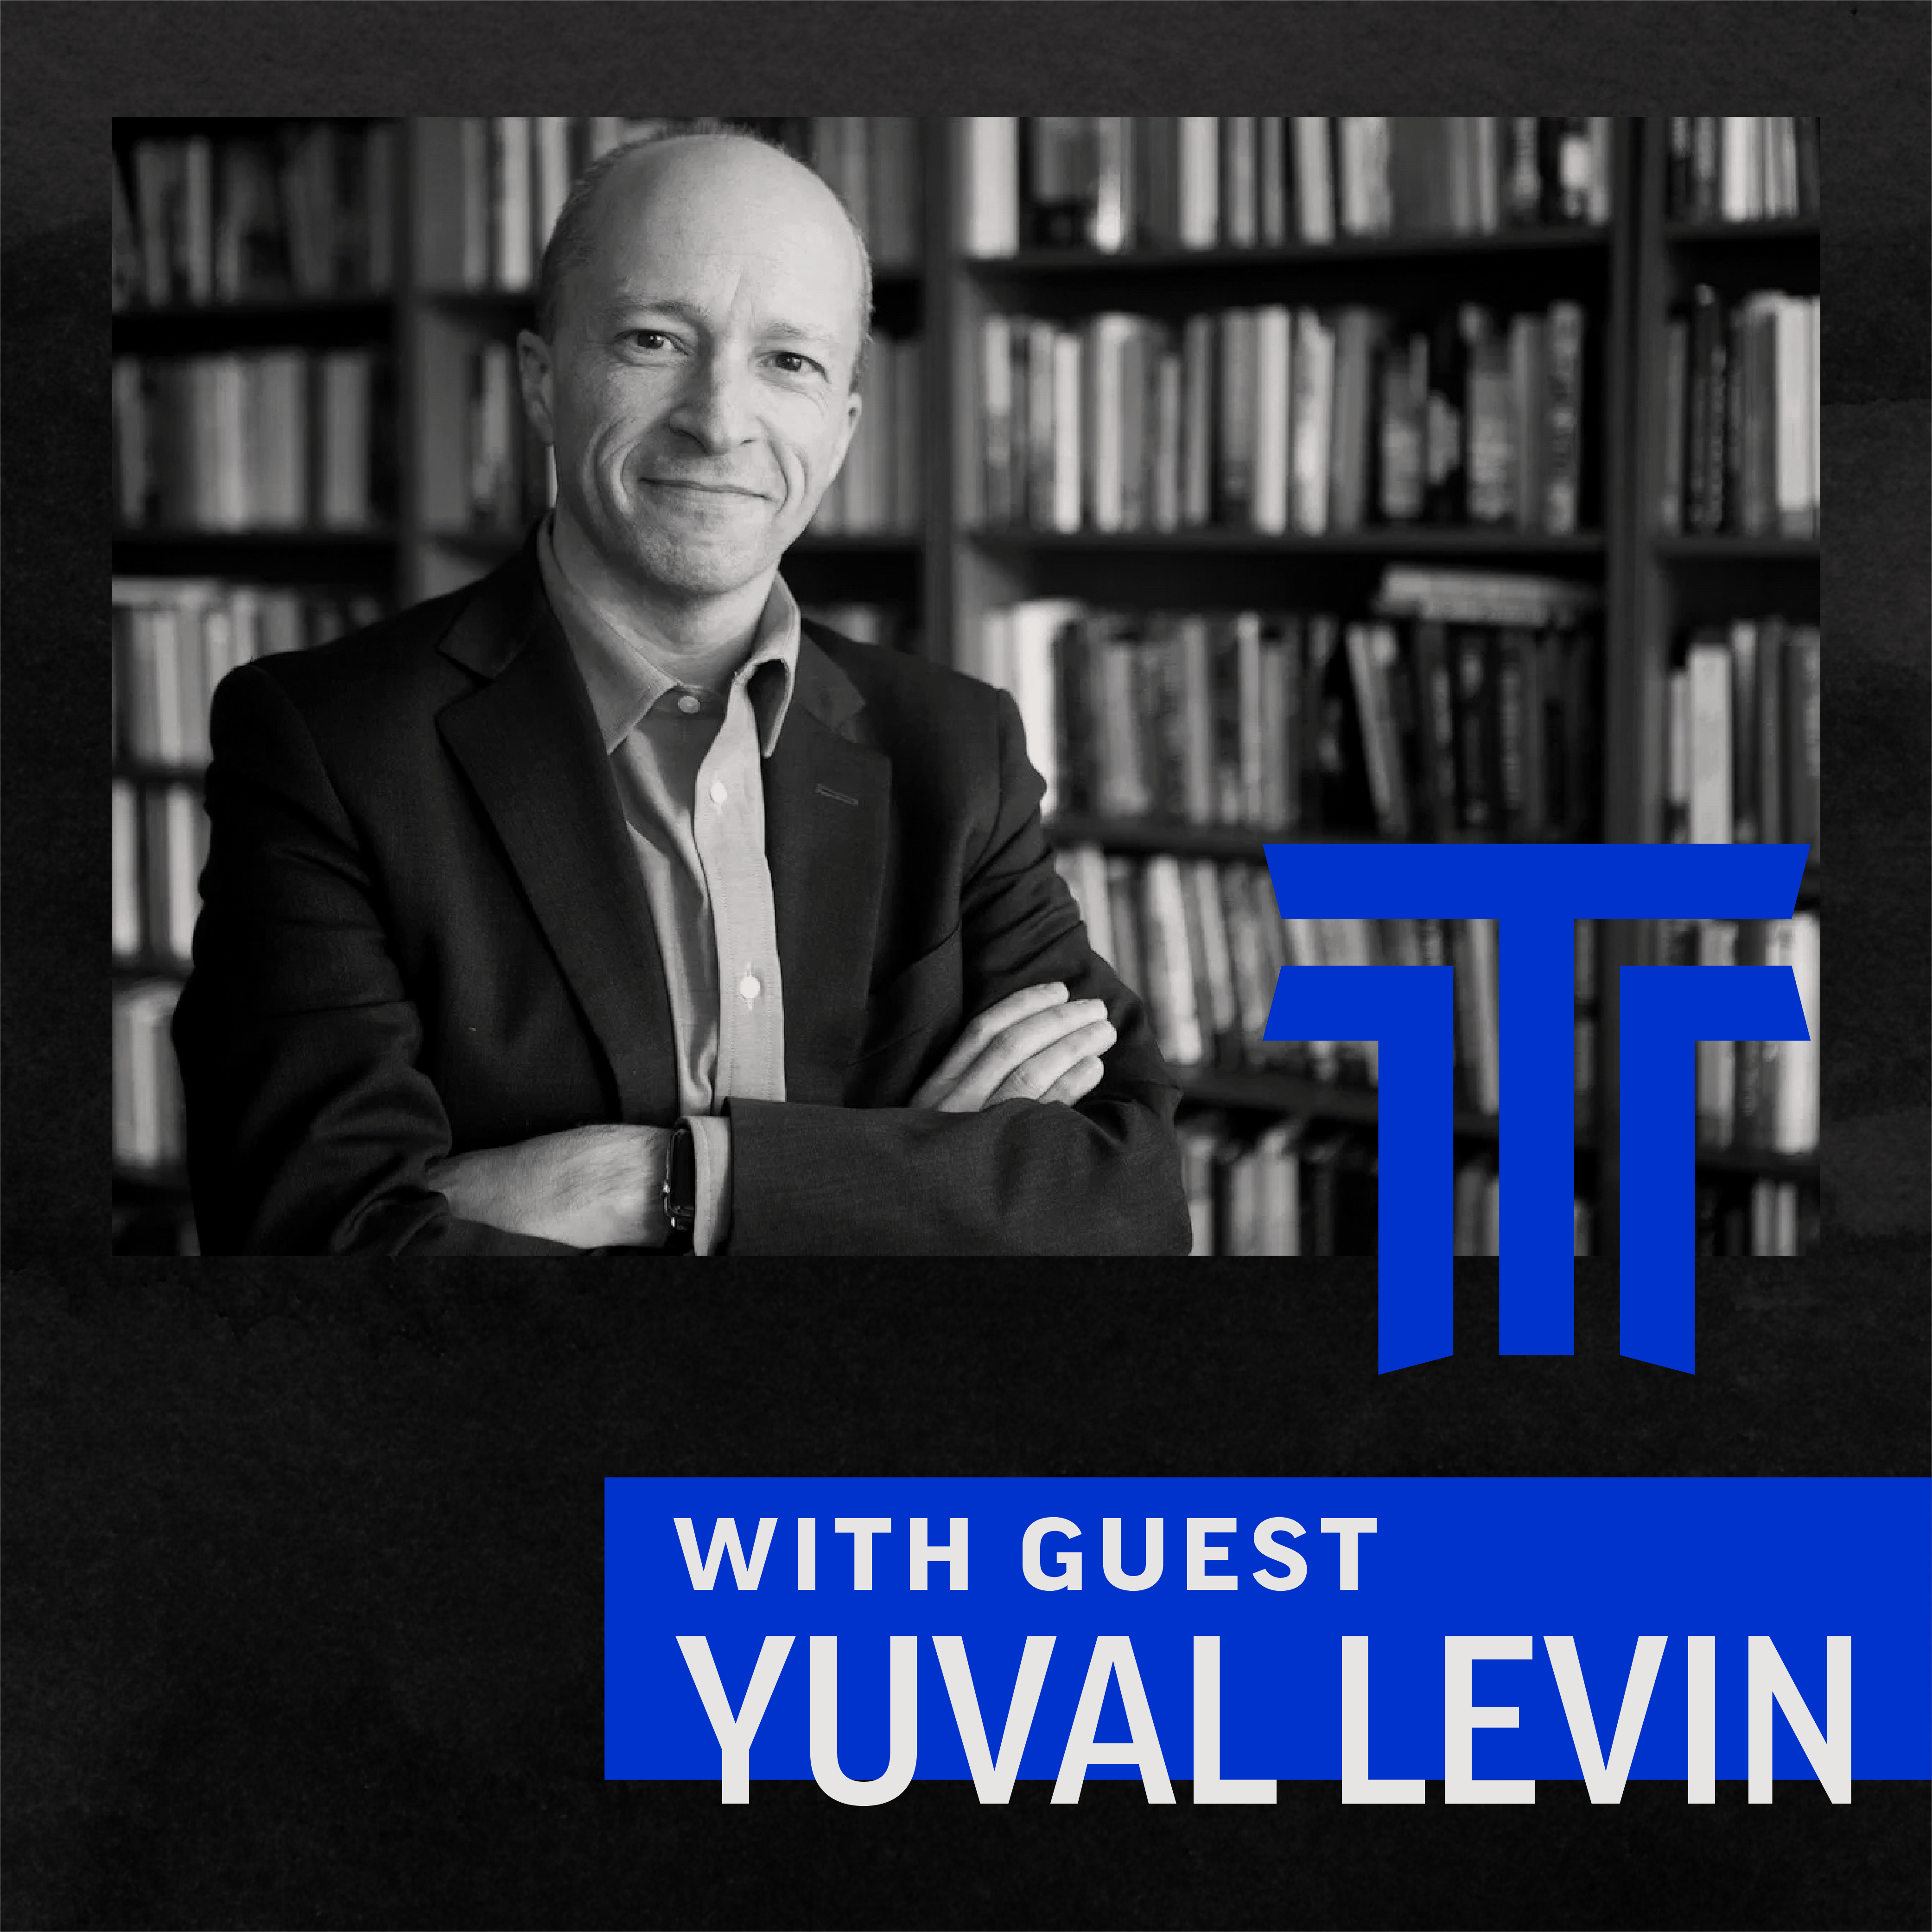 Should We Trust Our Institutions? with Yuval Levin